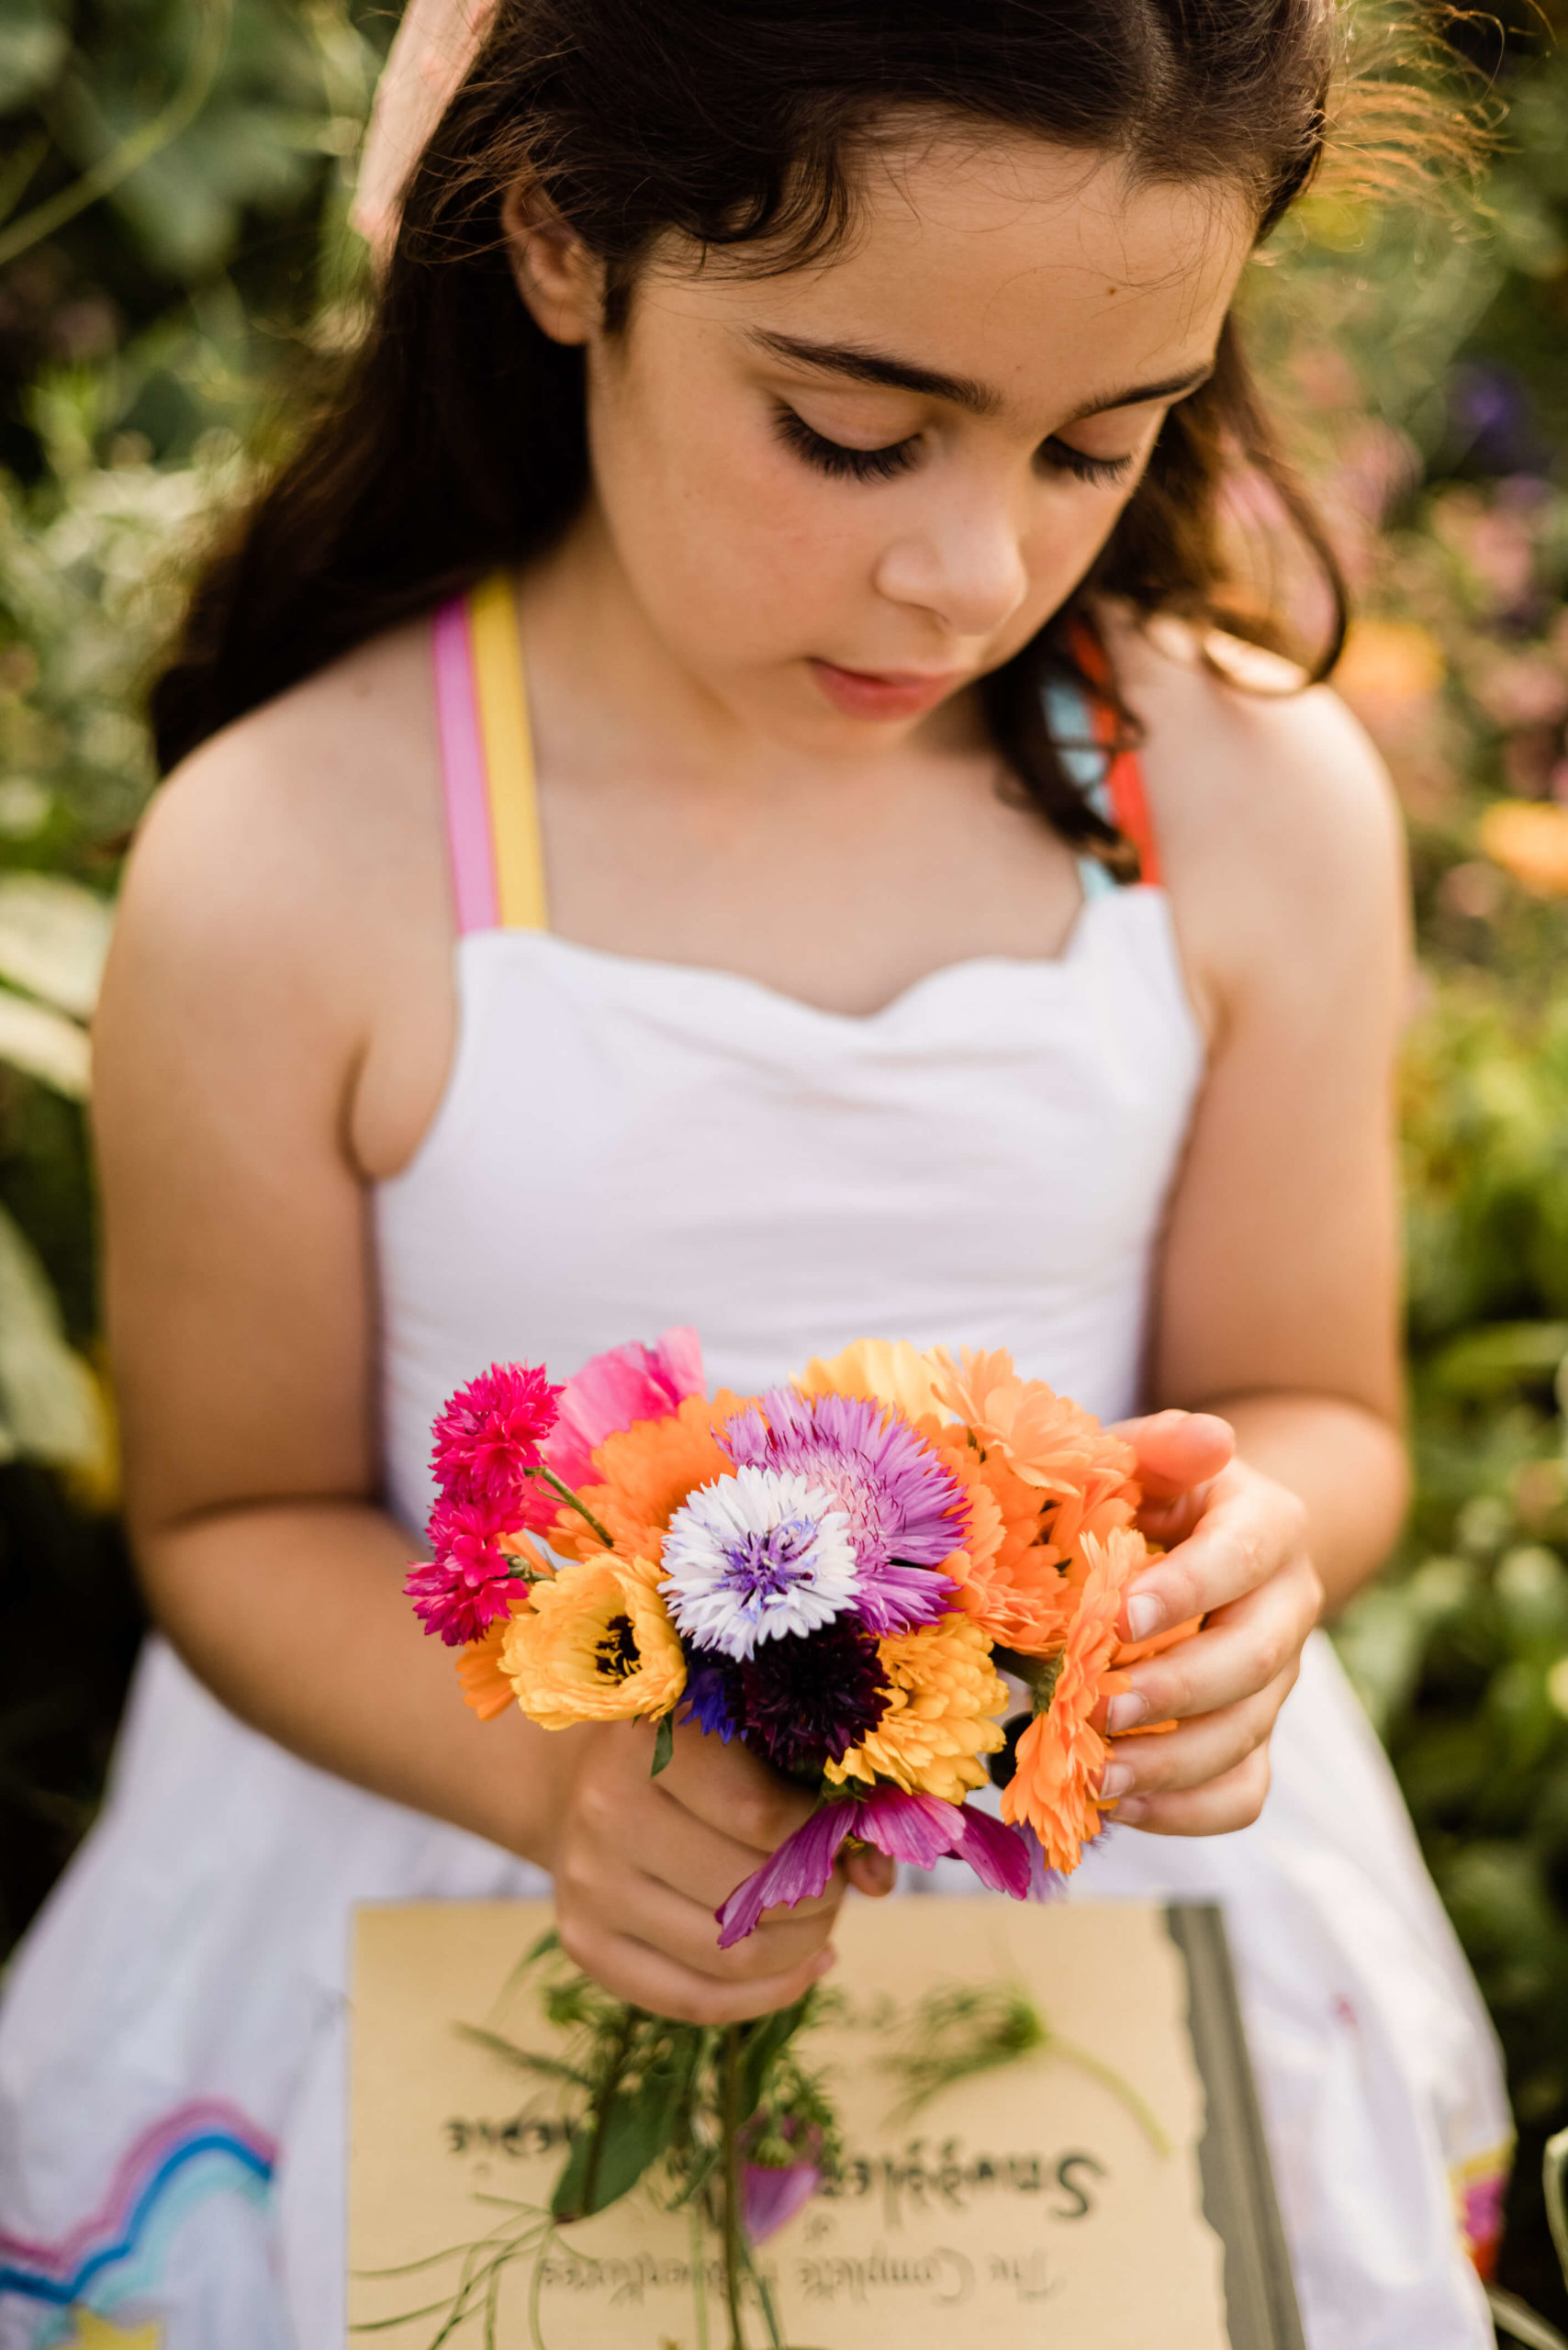 little girl holding flowers and book on lap captured by chelmsford photographer kika mitchell photography